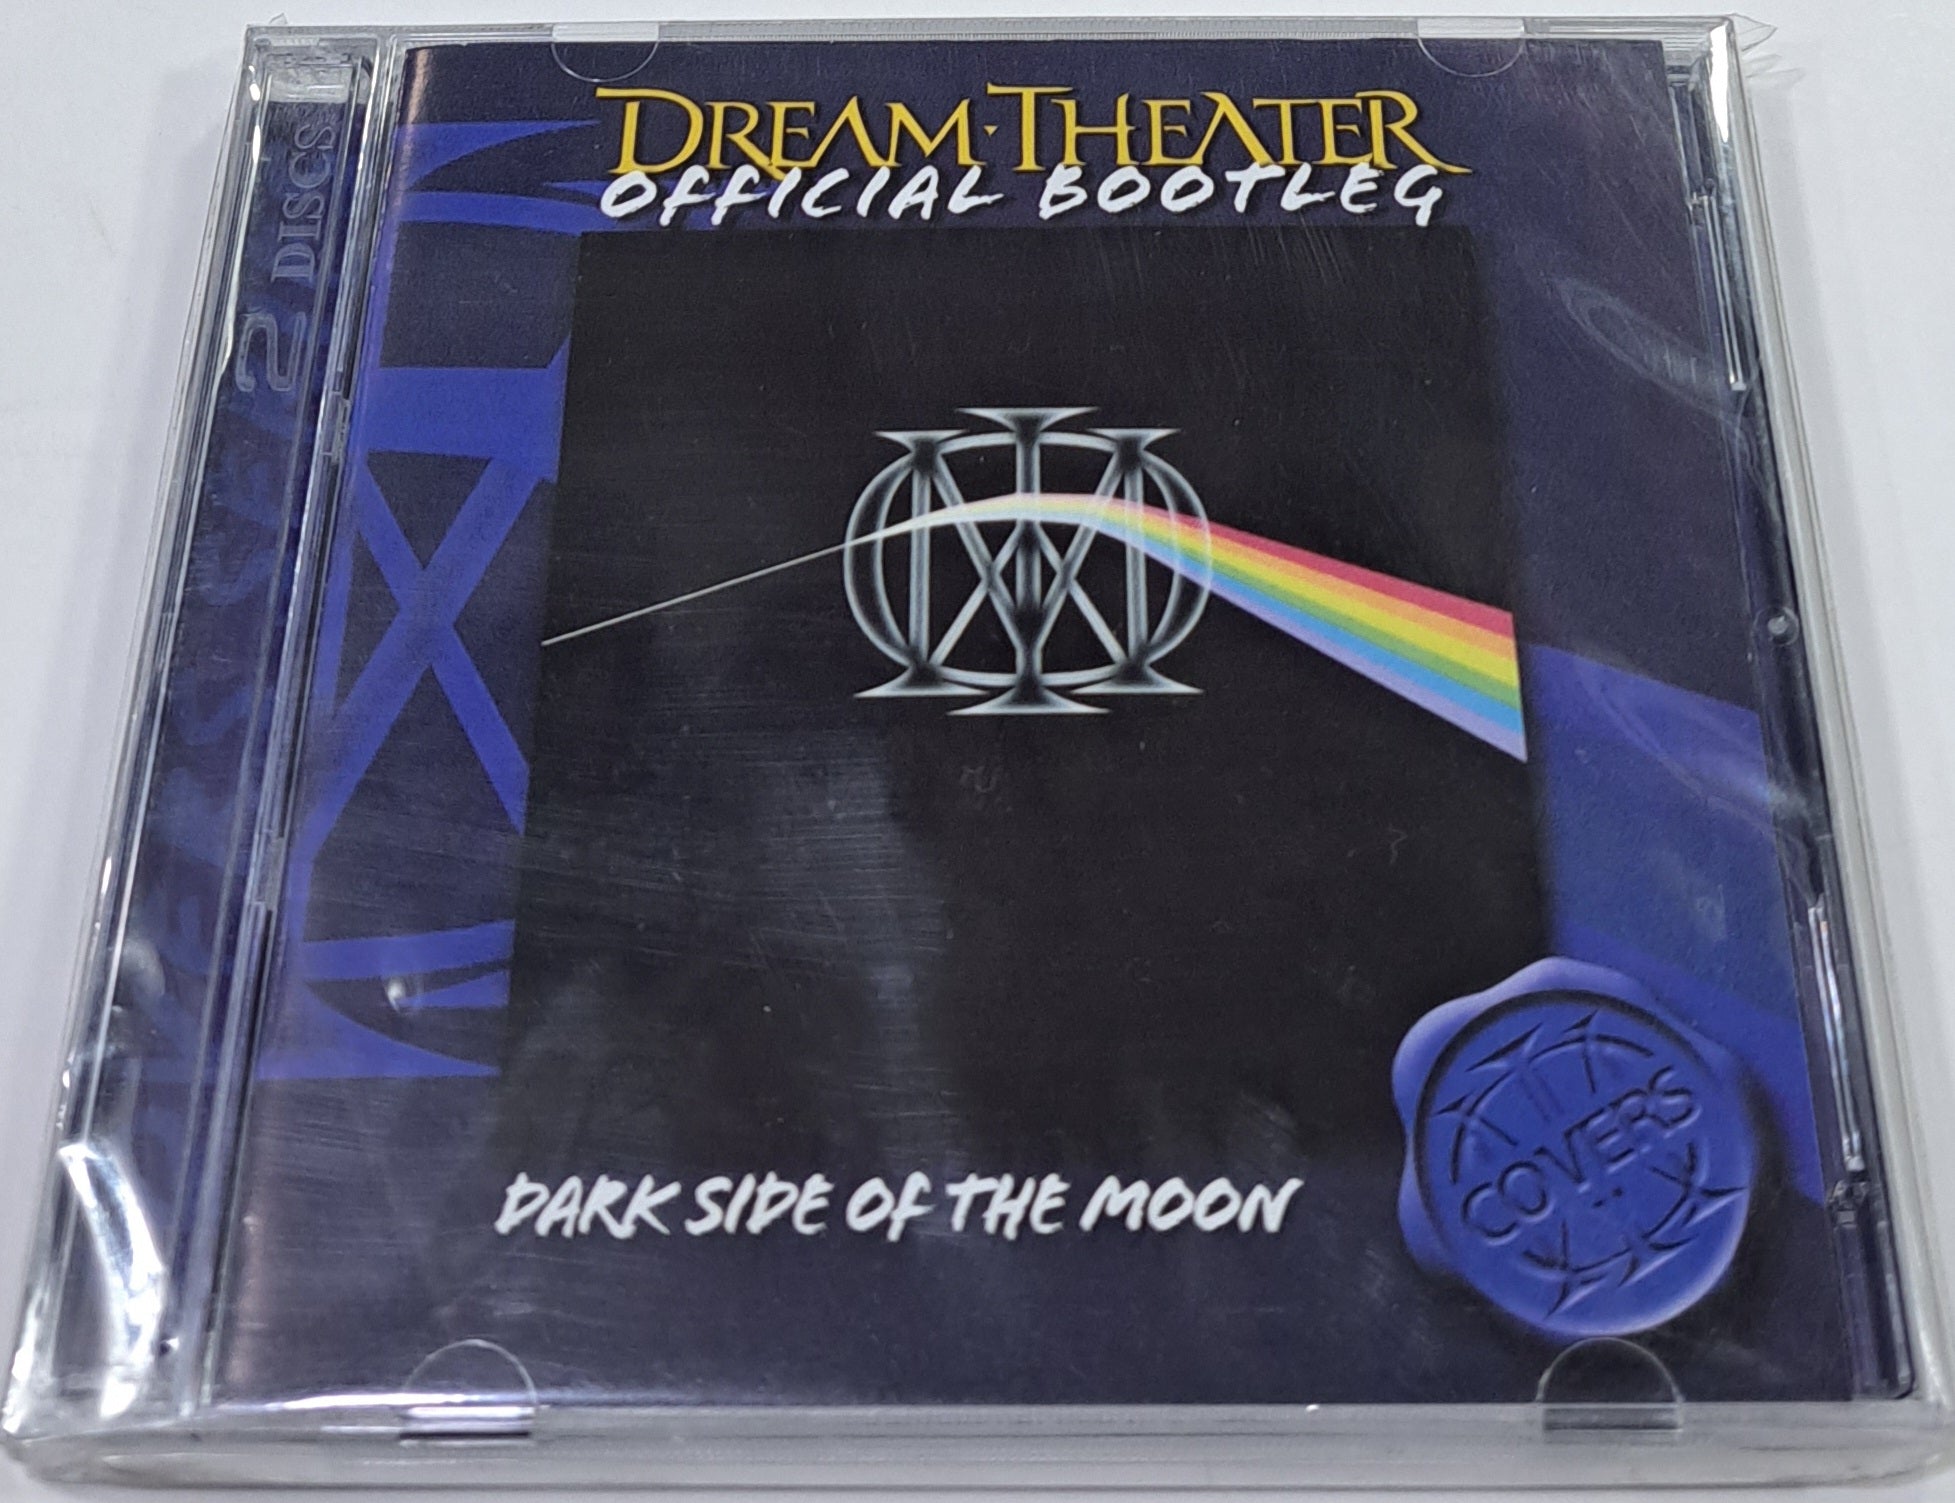 DREAM THEATER - DARK SIDE OF THE MOON 2 CDS – Circulo Musical